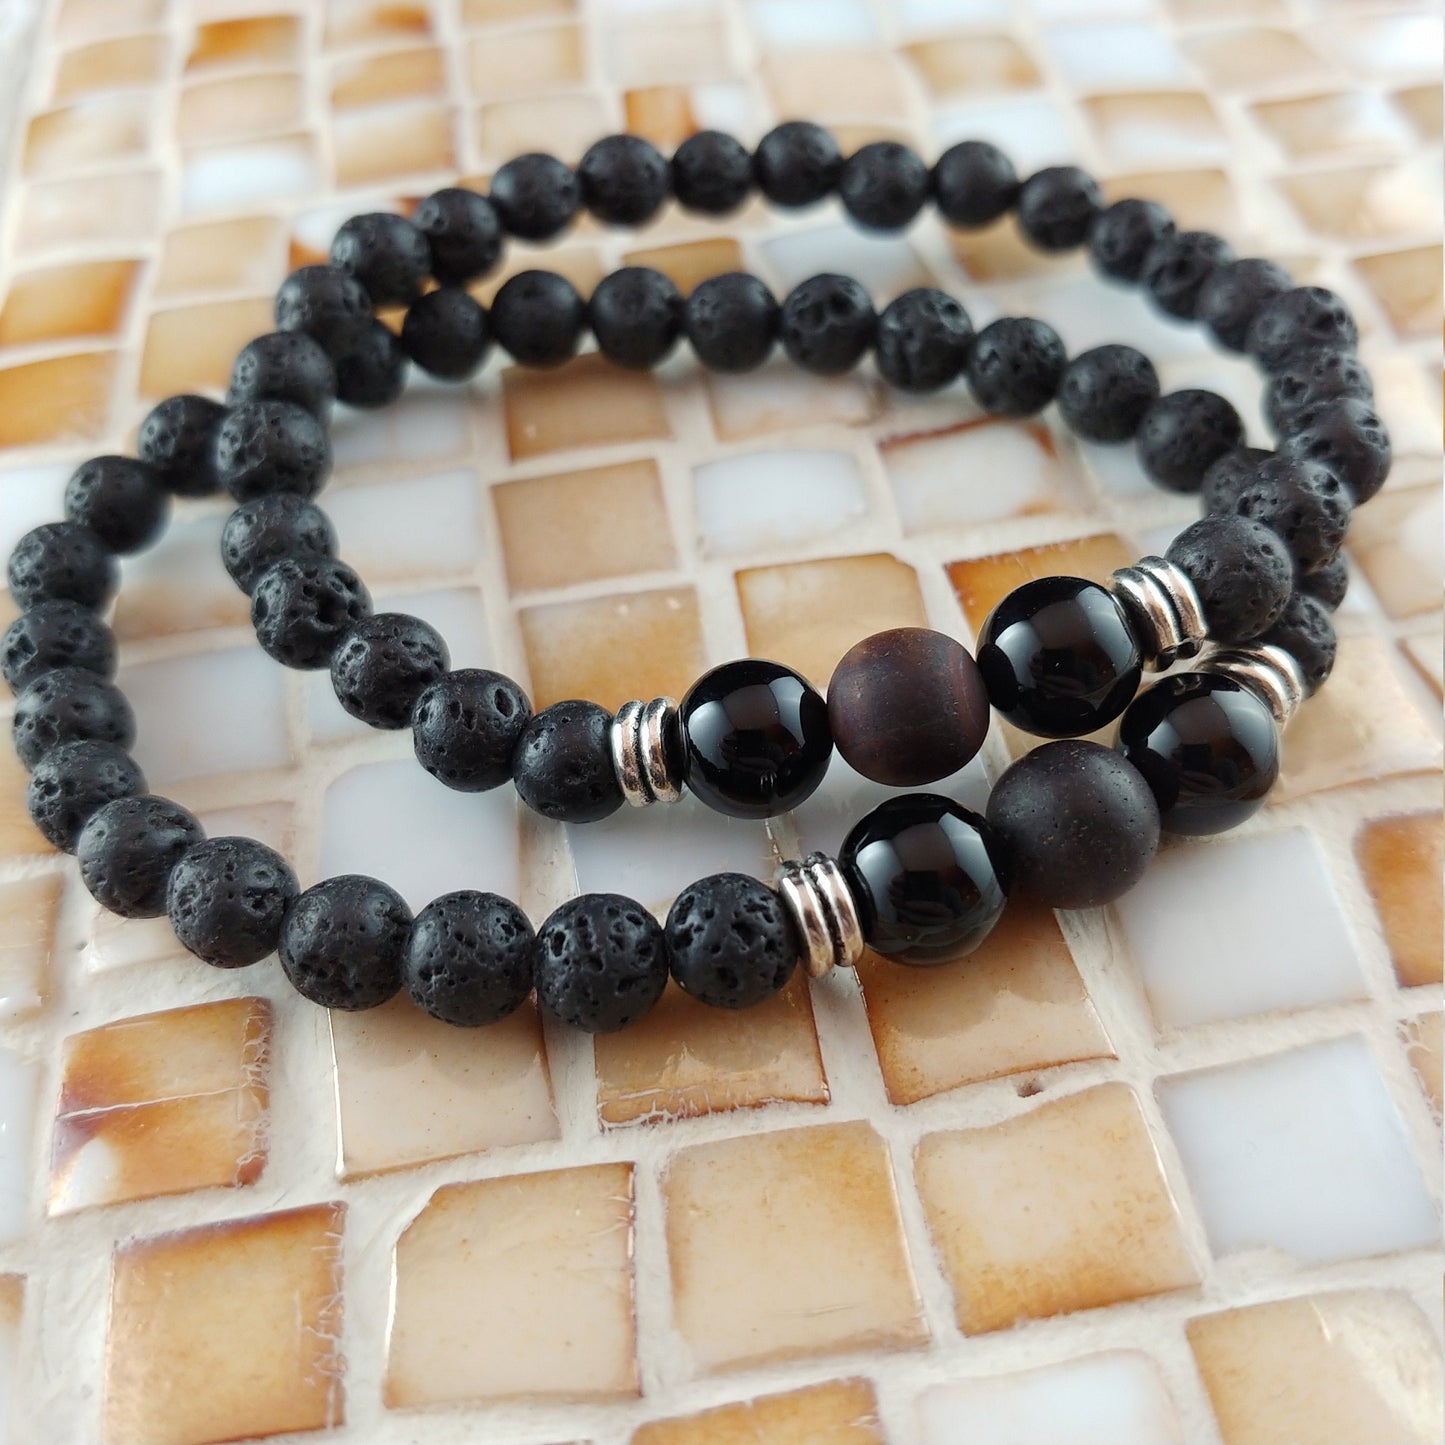 Tiger Eye Lava Bracelet - 6mm Lava Rock with 2 Black Agate Beads and 1 Frosted Tiger Eye